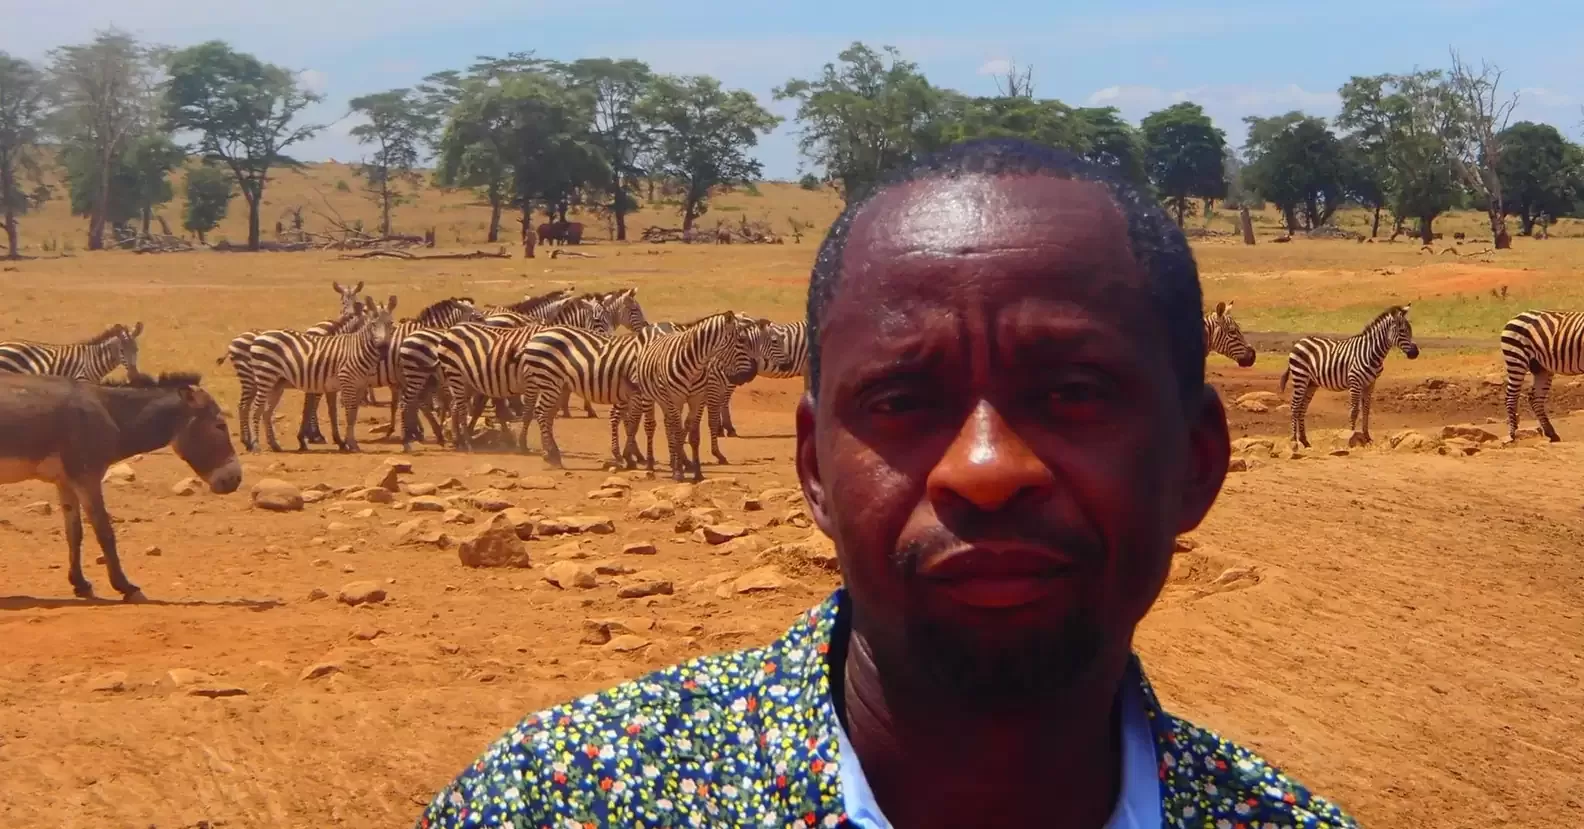 A man travels for hours daily through a drought to provide water for wild animals 10